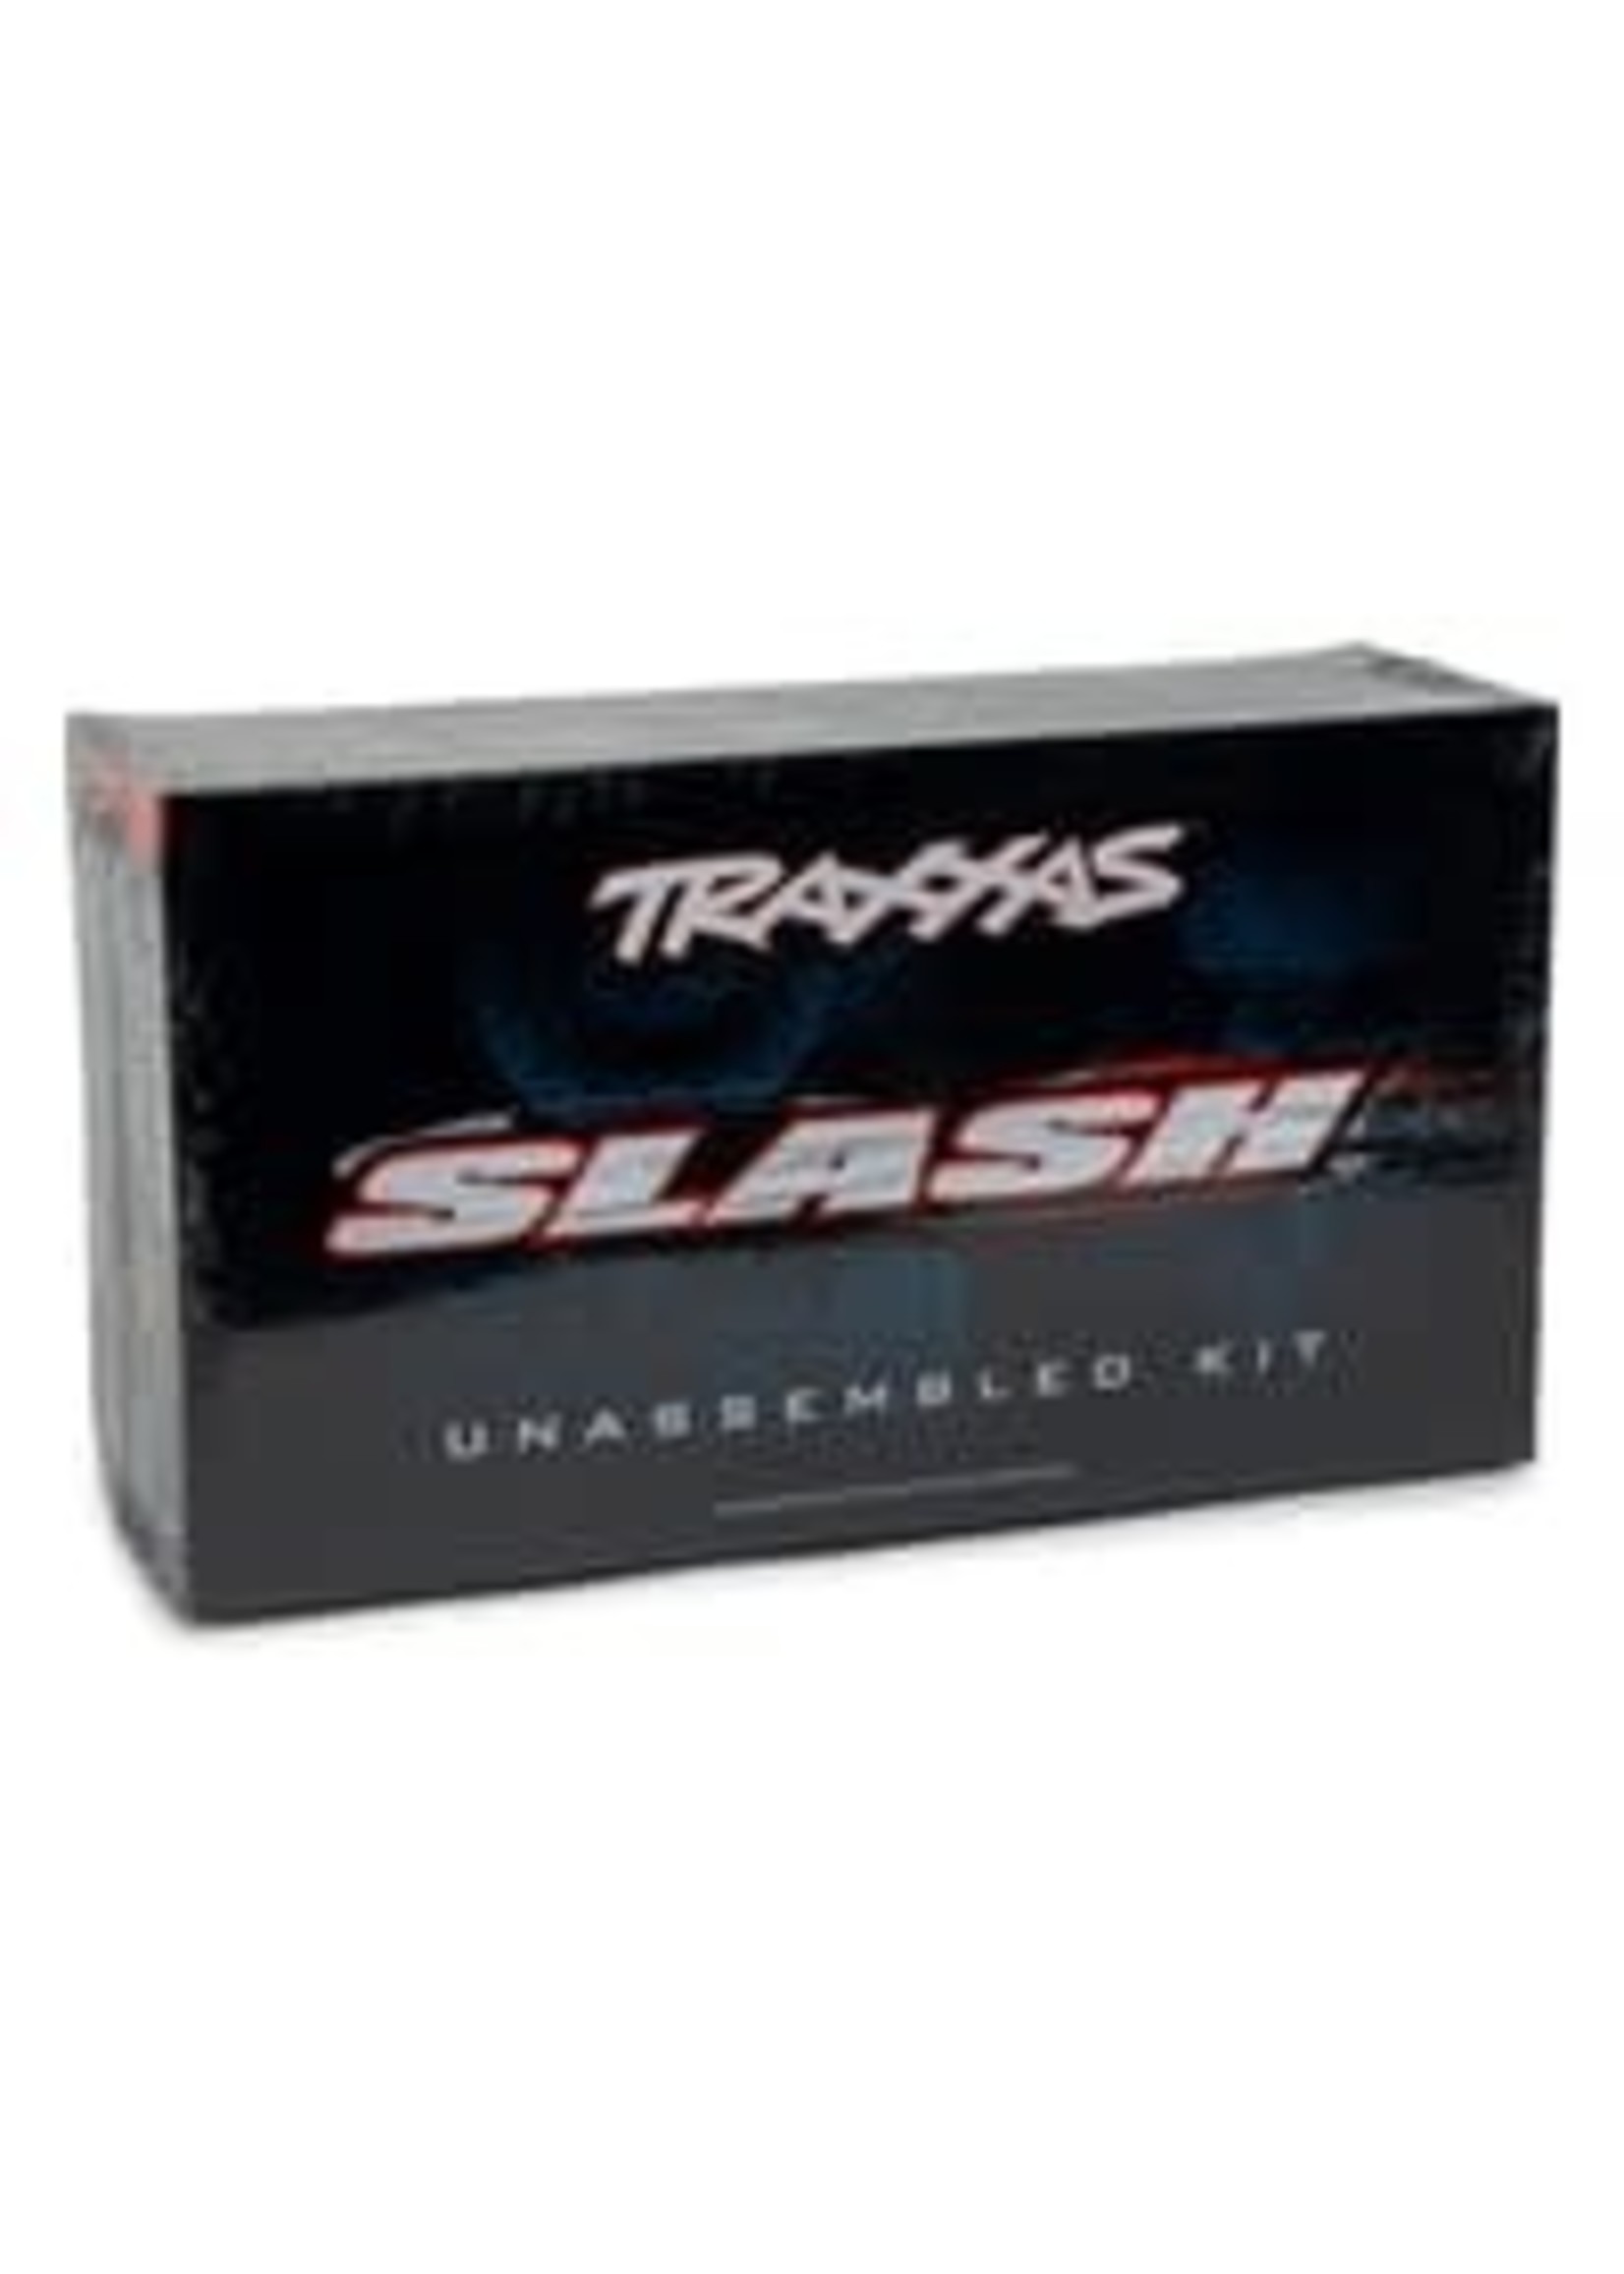 Traxxas 58014-4 Slash 2WD Unassembled Kit: 1/10-scale 2WD Short Course Racing Truck with TQ 2.4GHz radio system